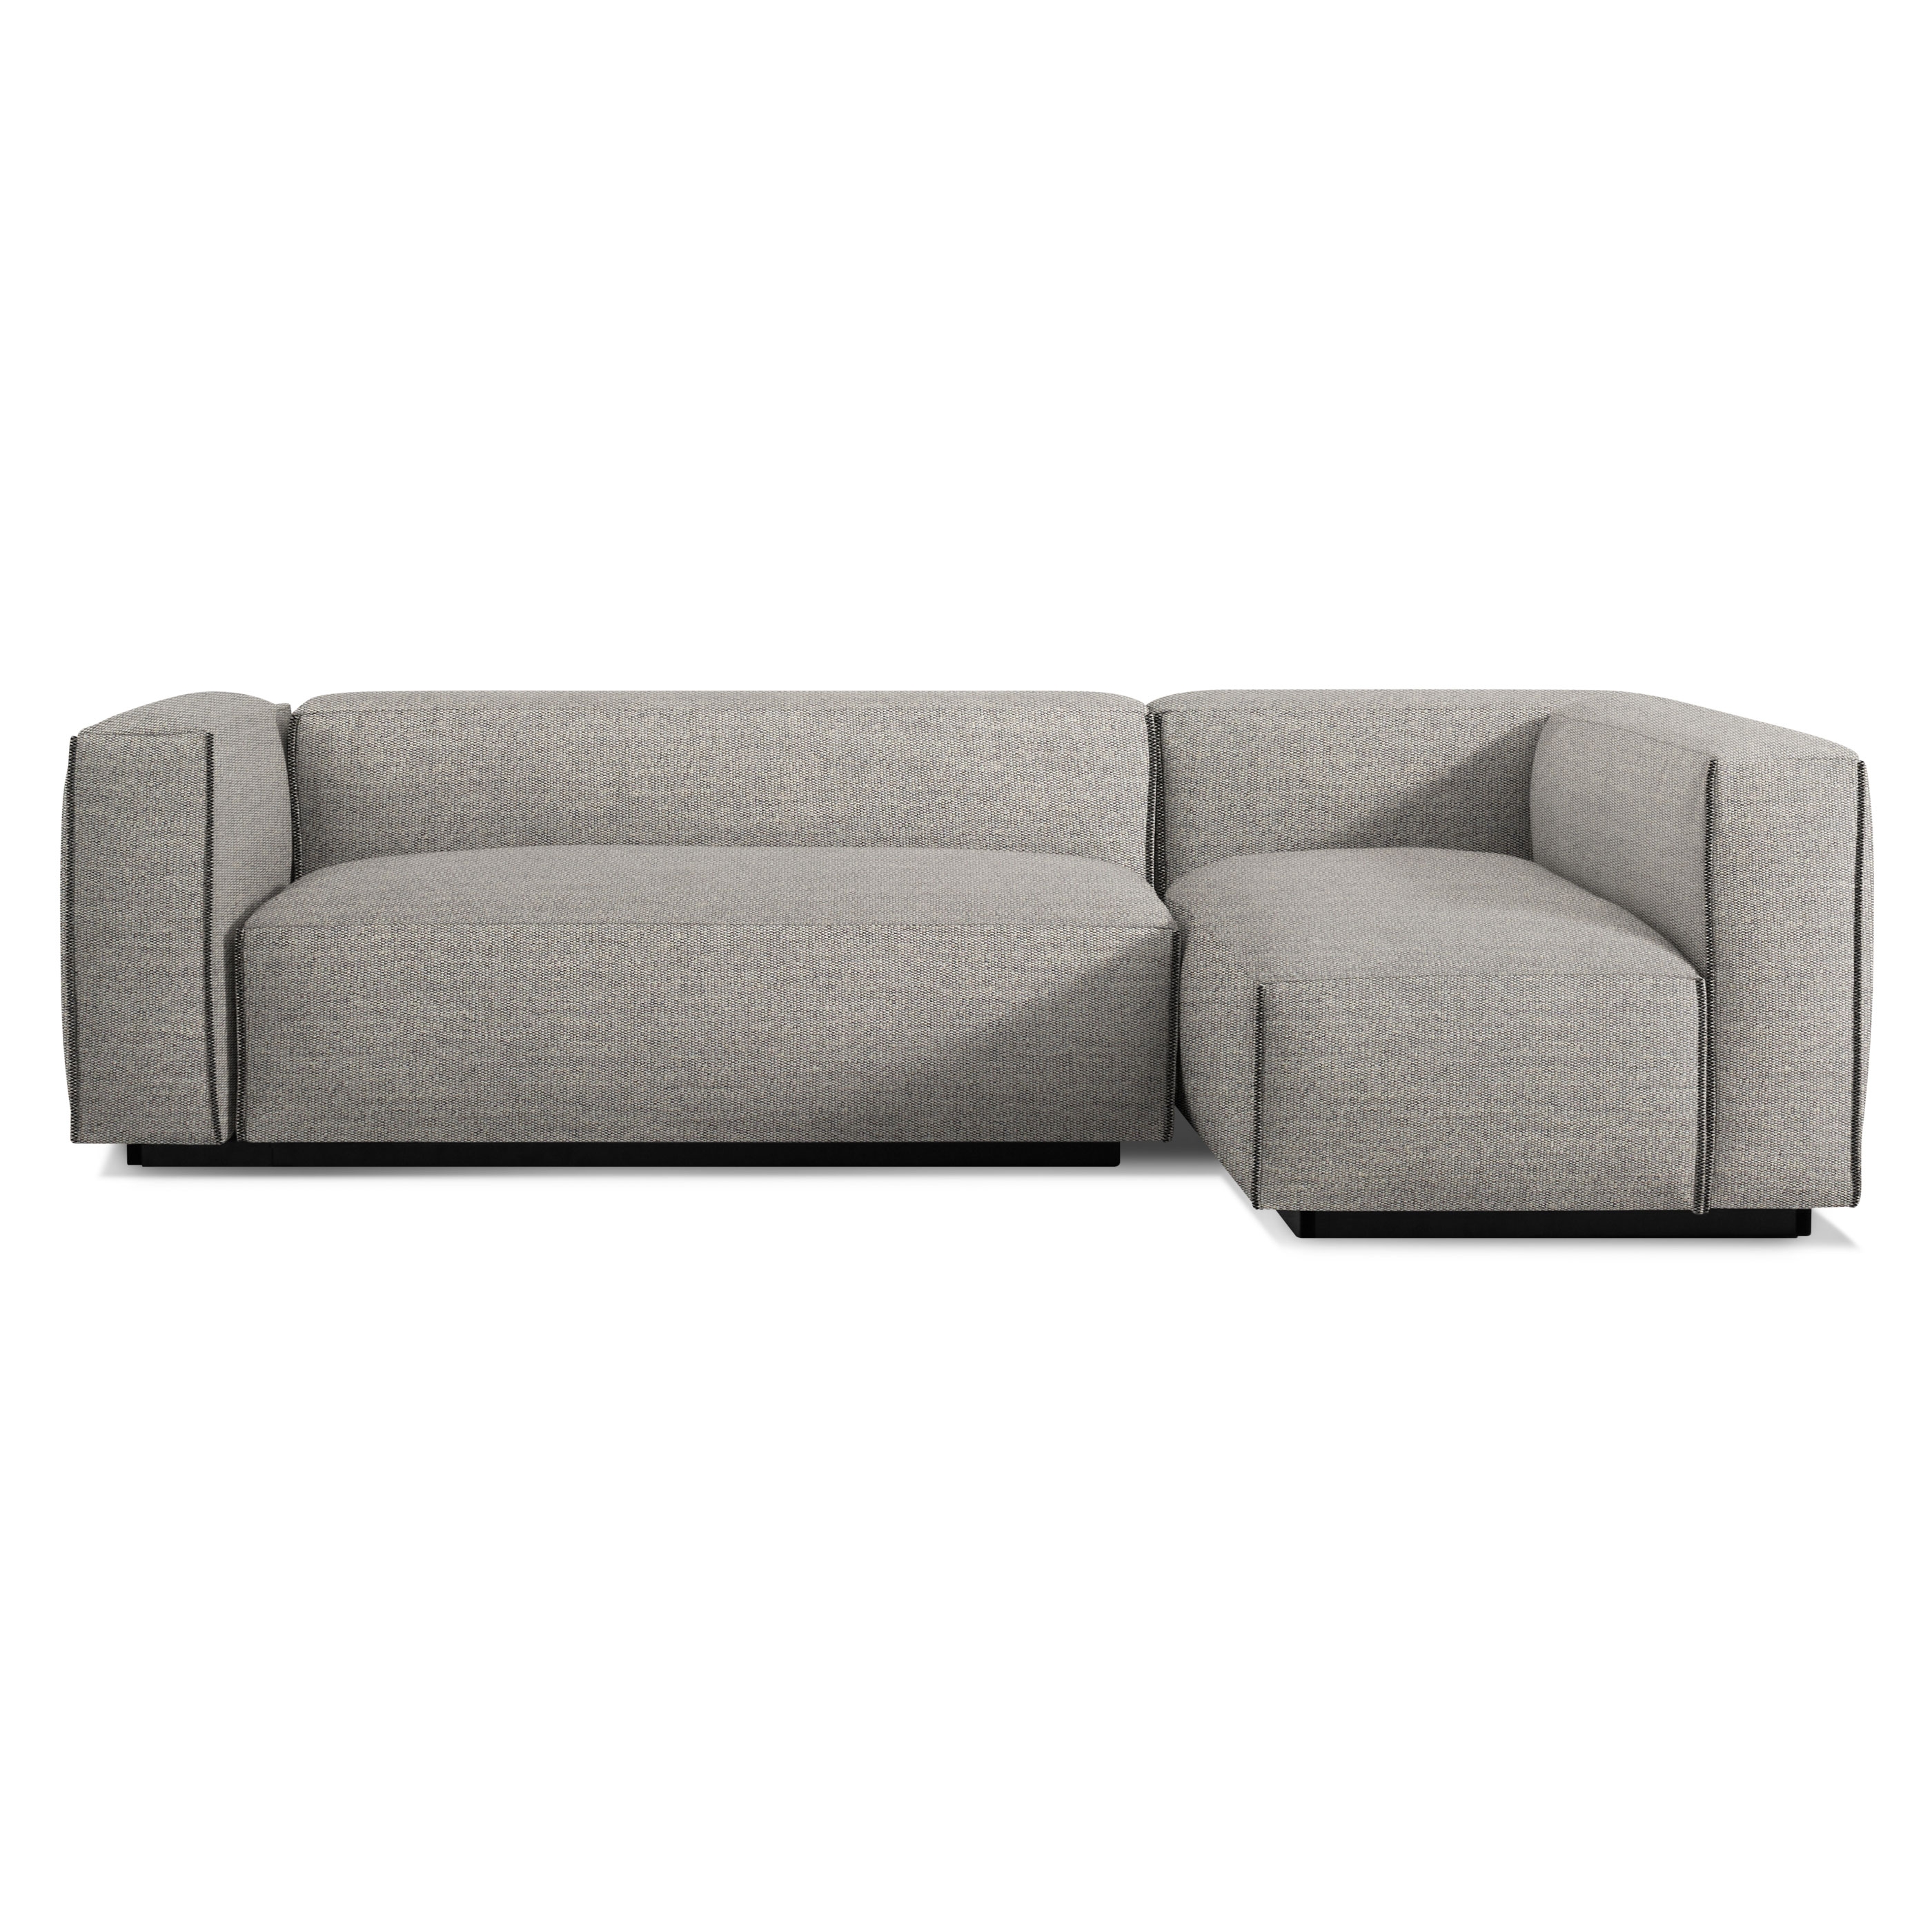 Modern Sectional Sofas previous image cleon small sectional sofa - tait charcoal ... UKXFRAQ